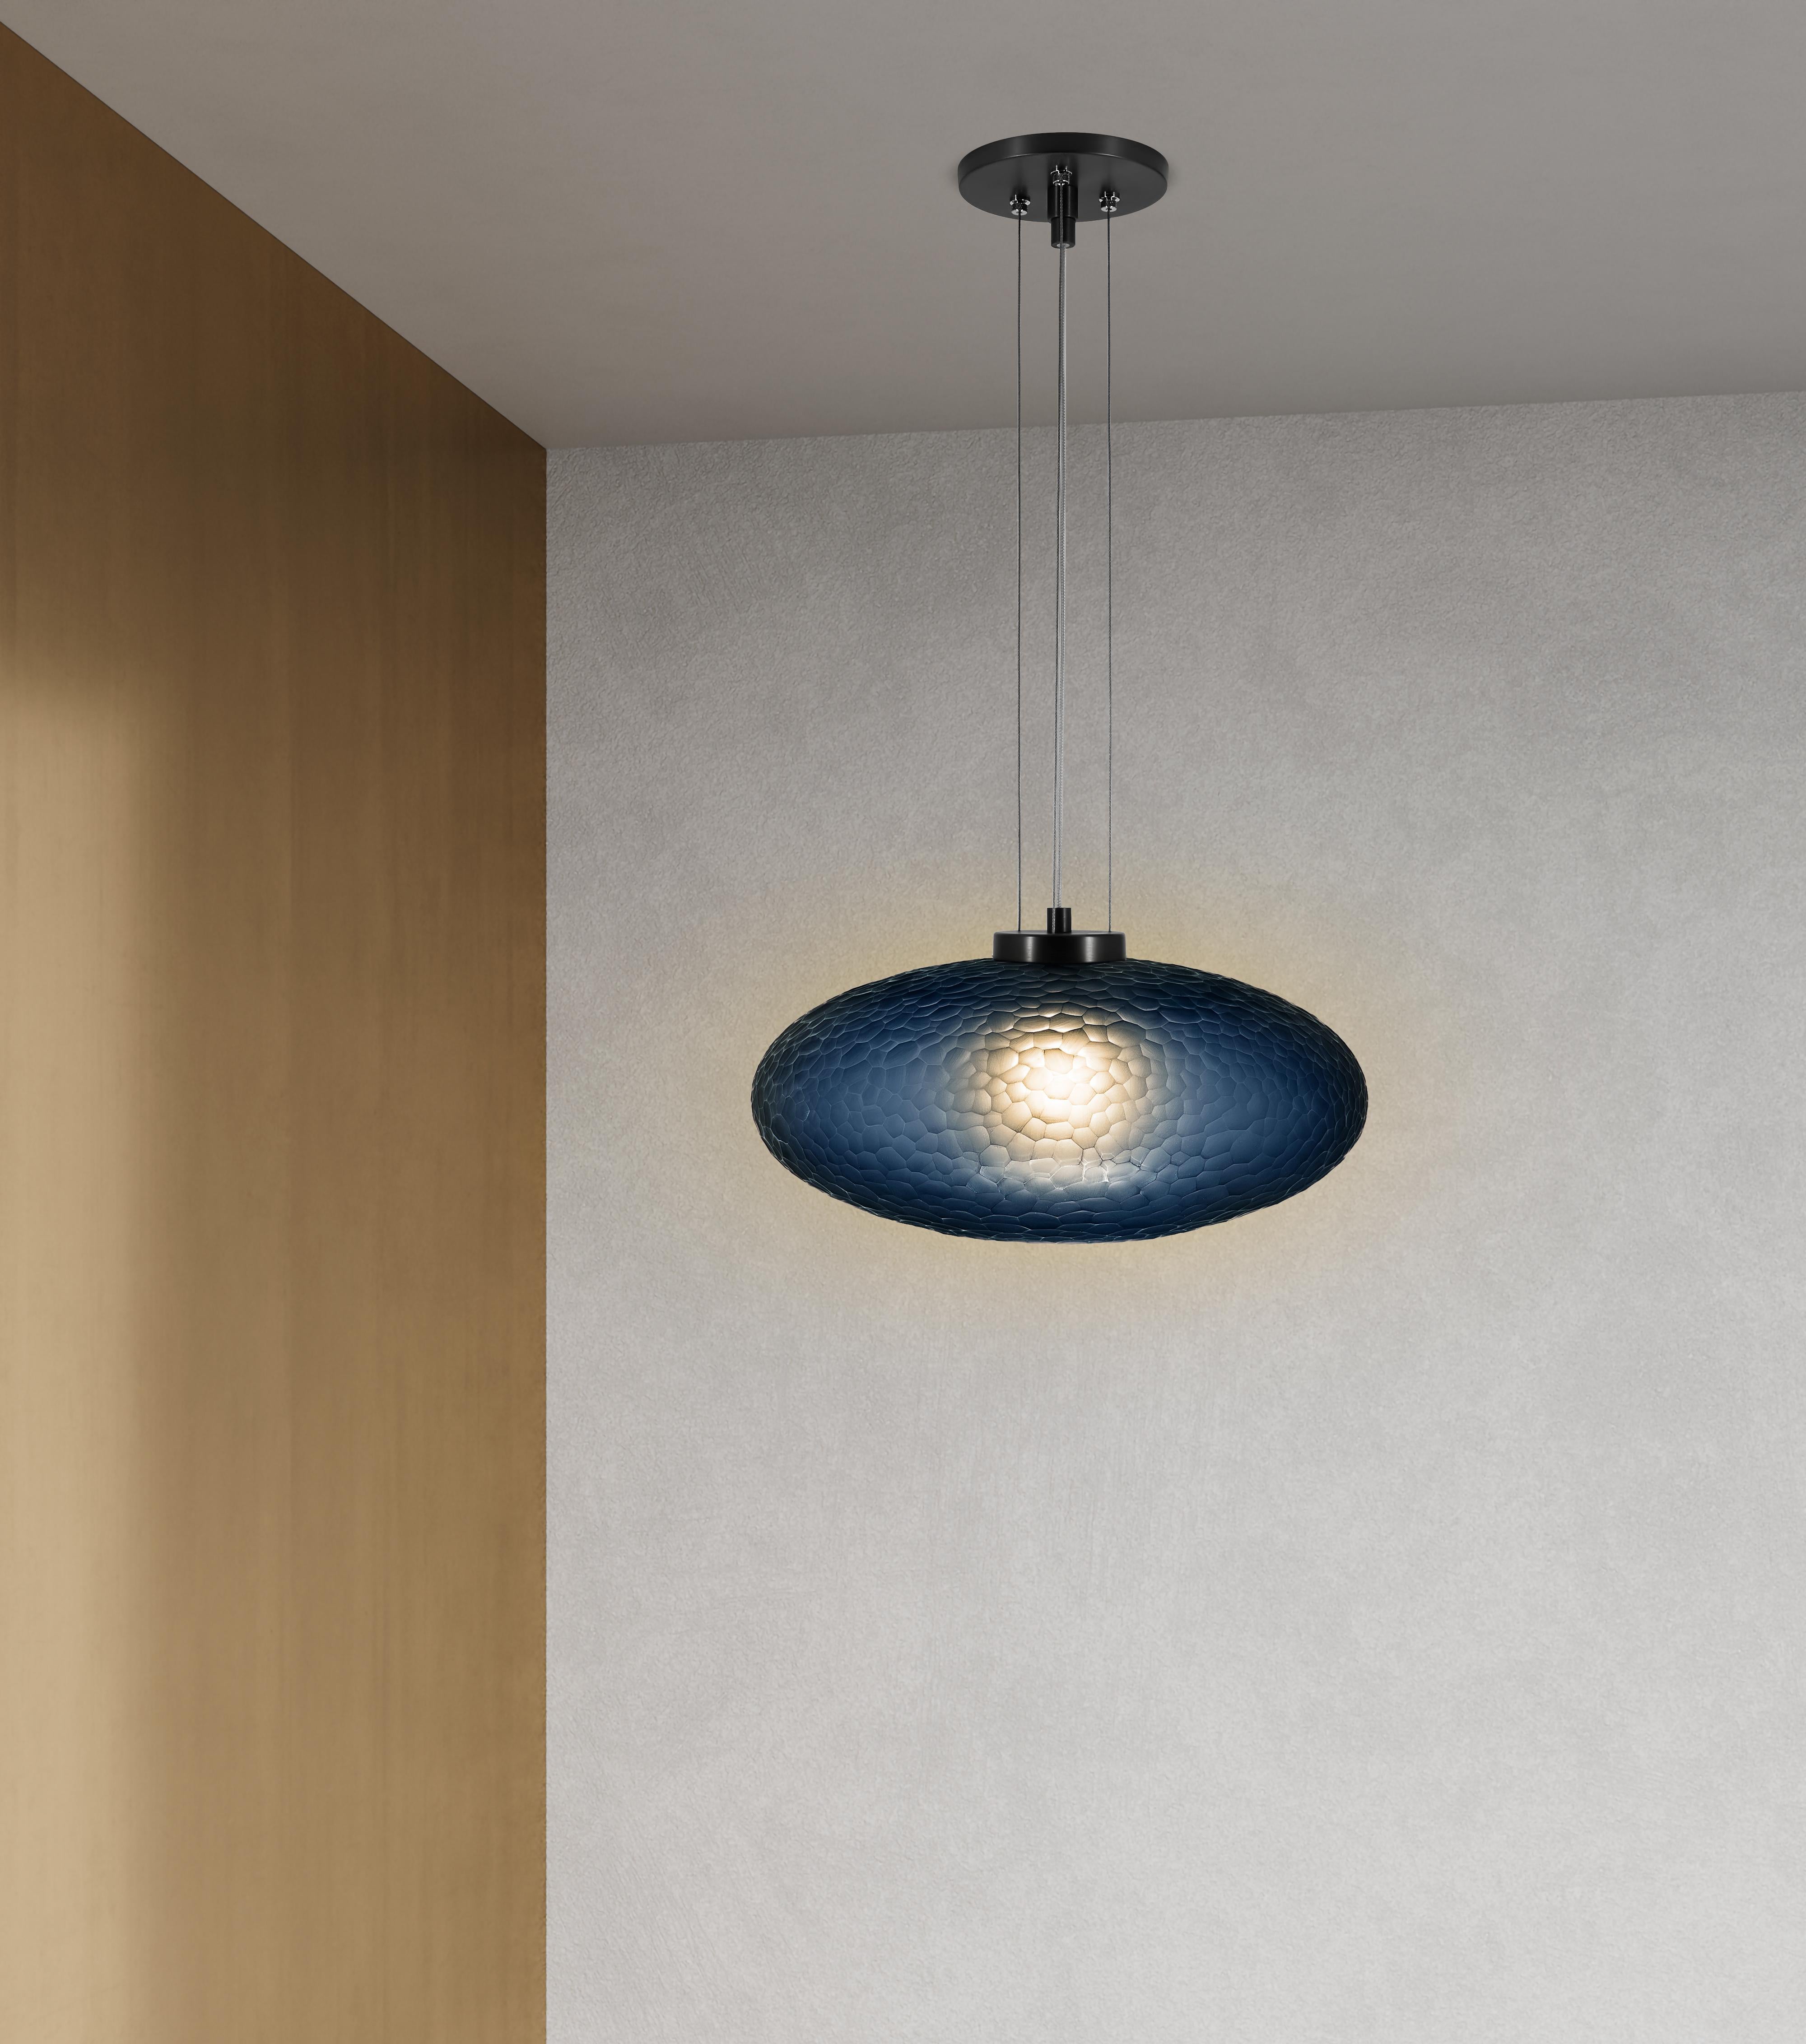 Inspired by the 70s avant-garde aesthetic, the Lennox’s hand-carved Battuto finish lends an elevated ambiance to its retro, oval silhouette. Whether as a pendant or sconce, the special glow of the Lennox glass stands out with a brilliant halo